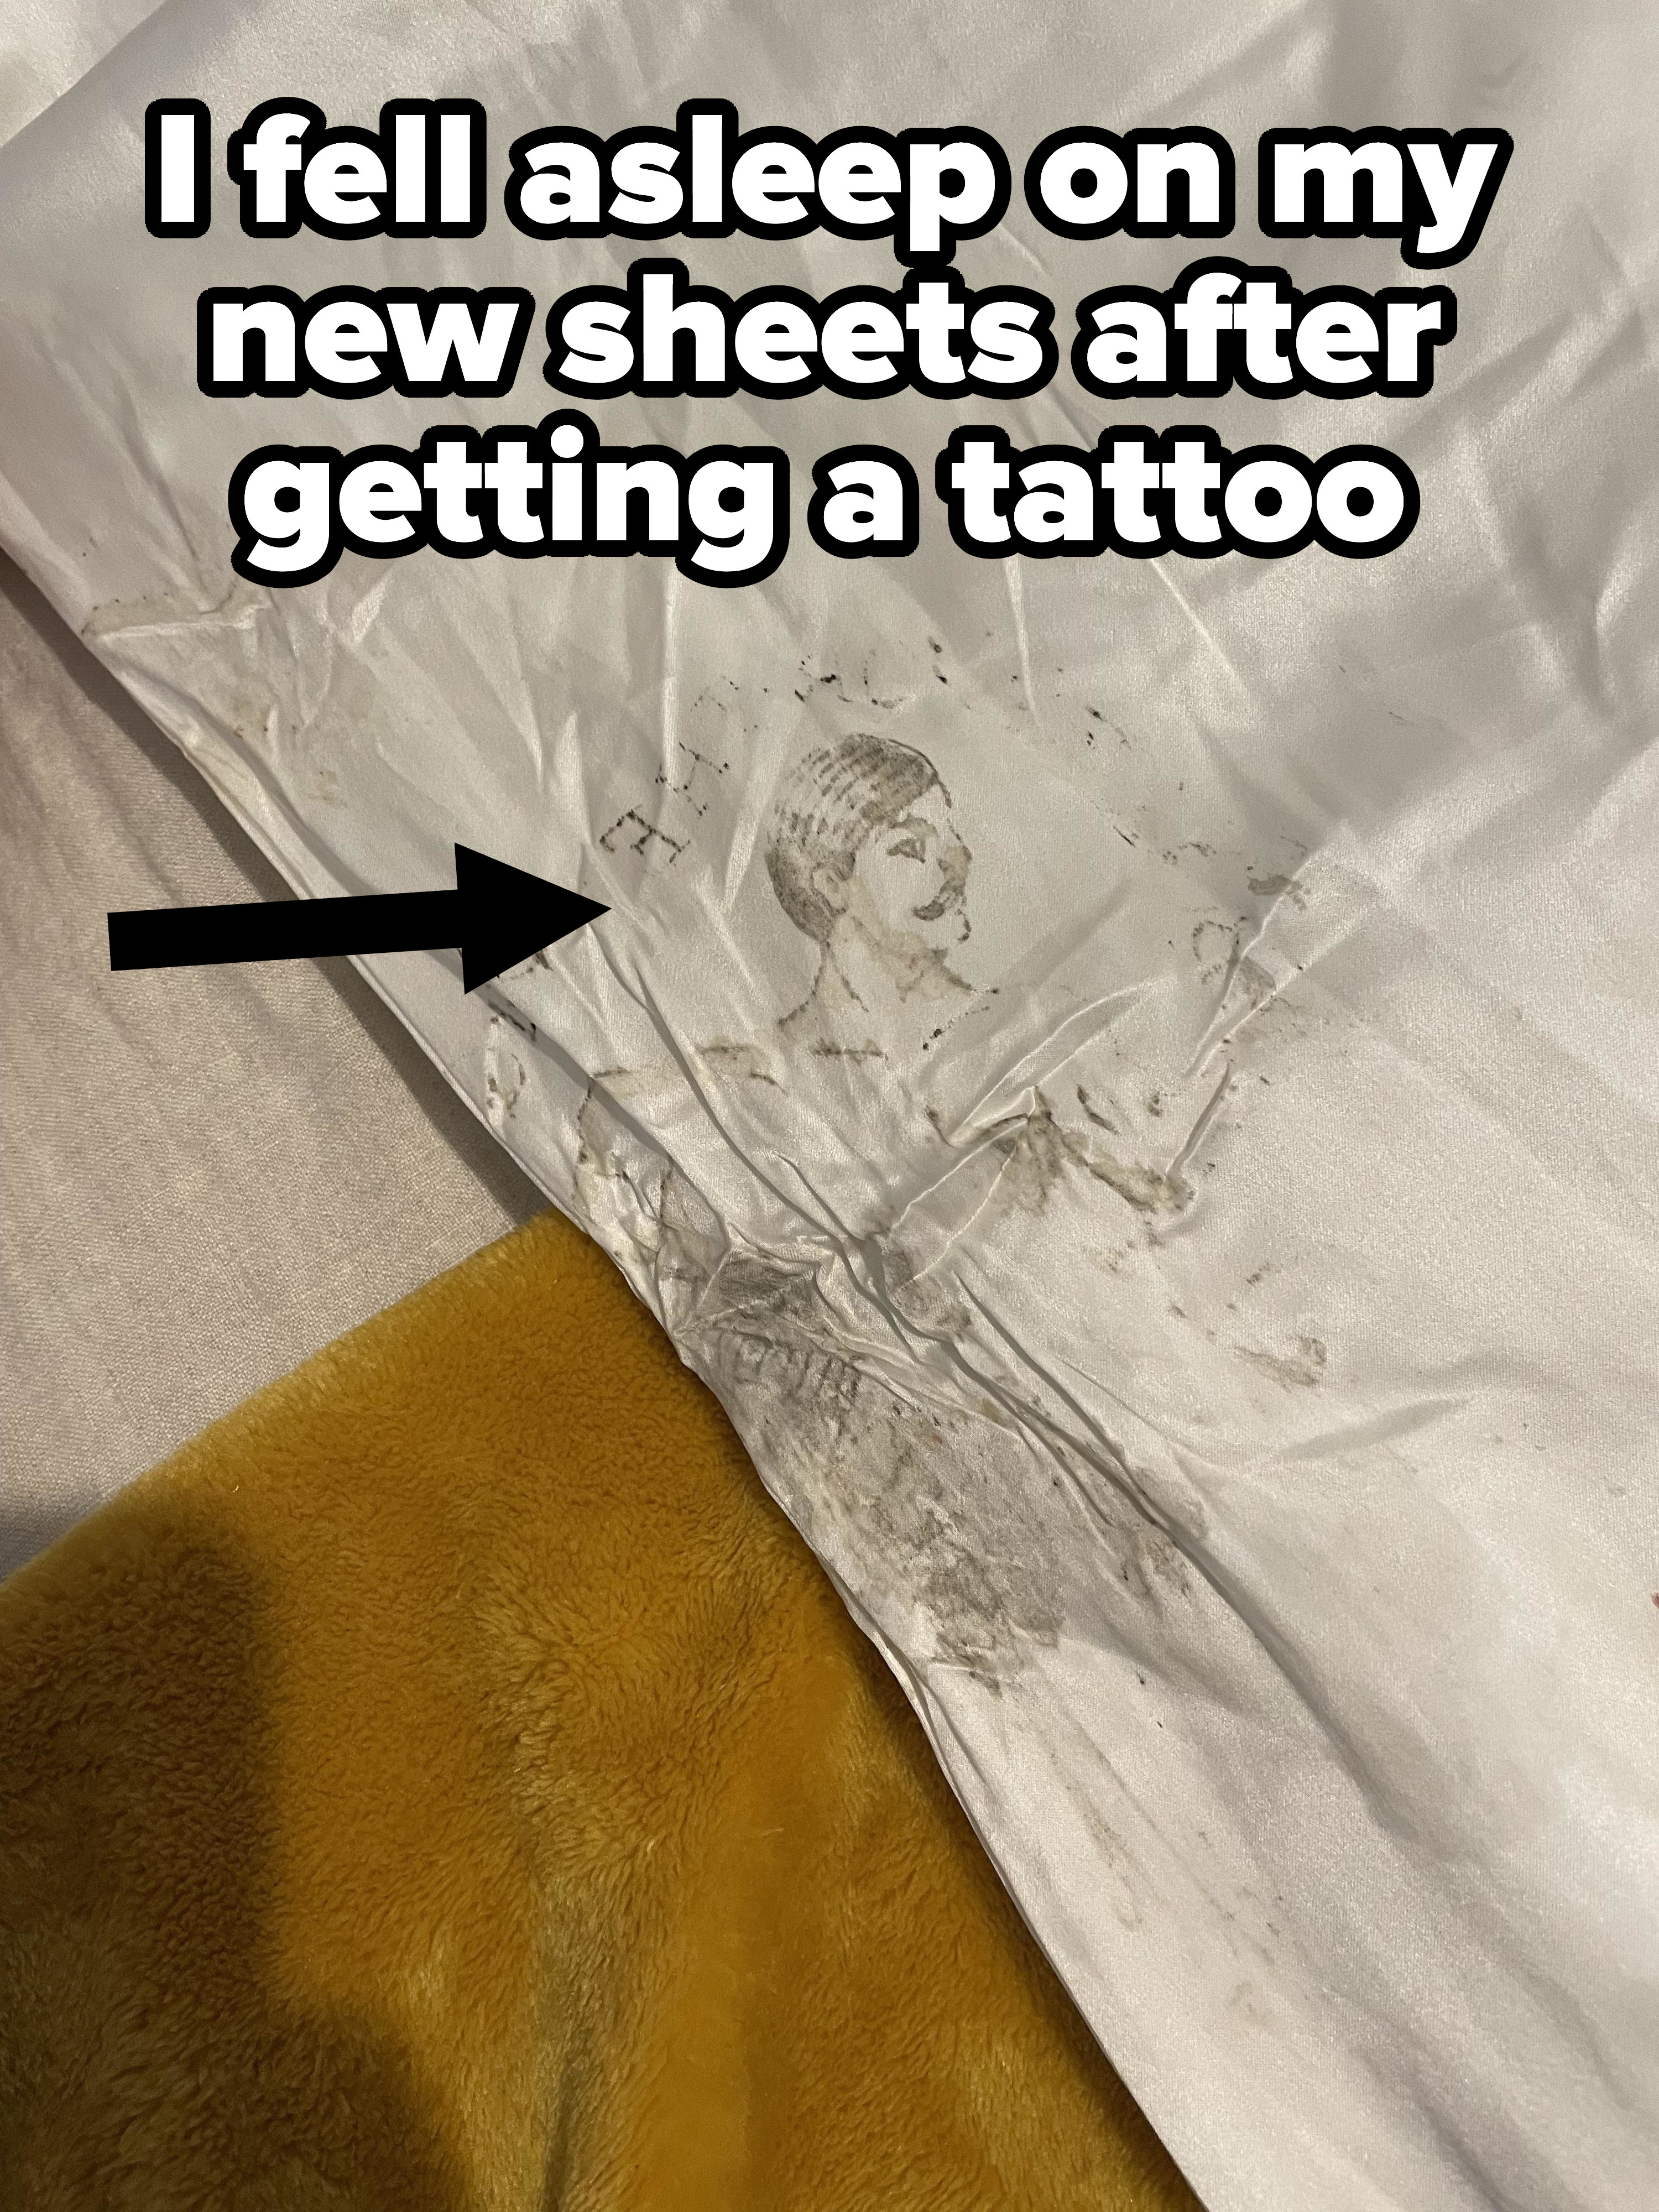 person who stained their sheets with a new tattoo